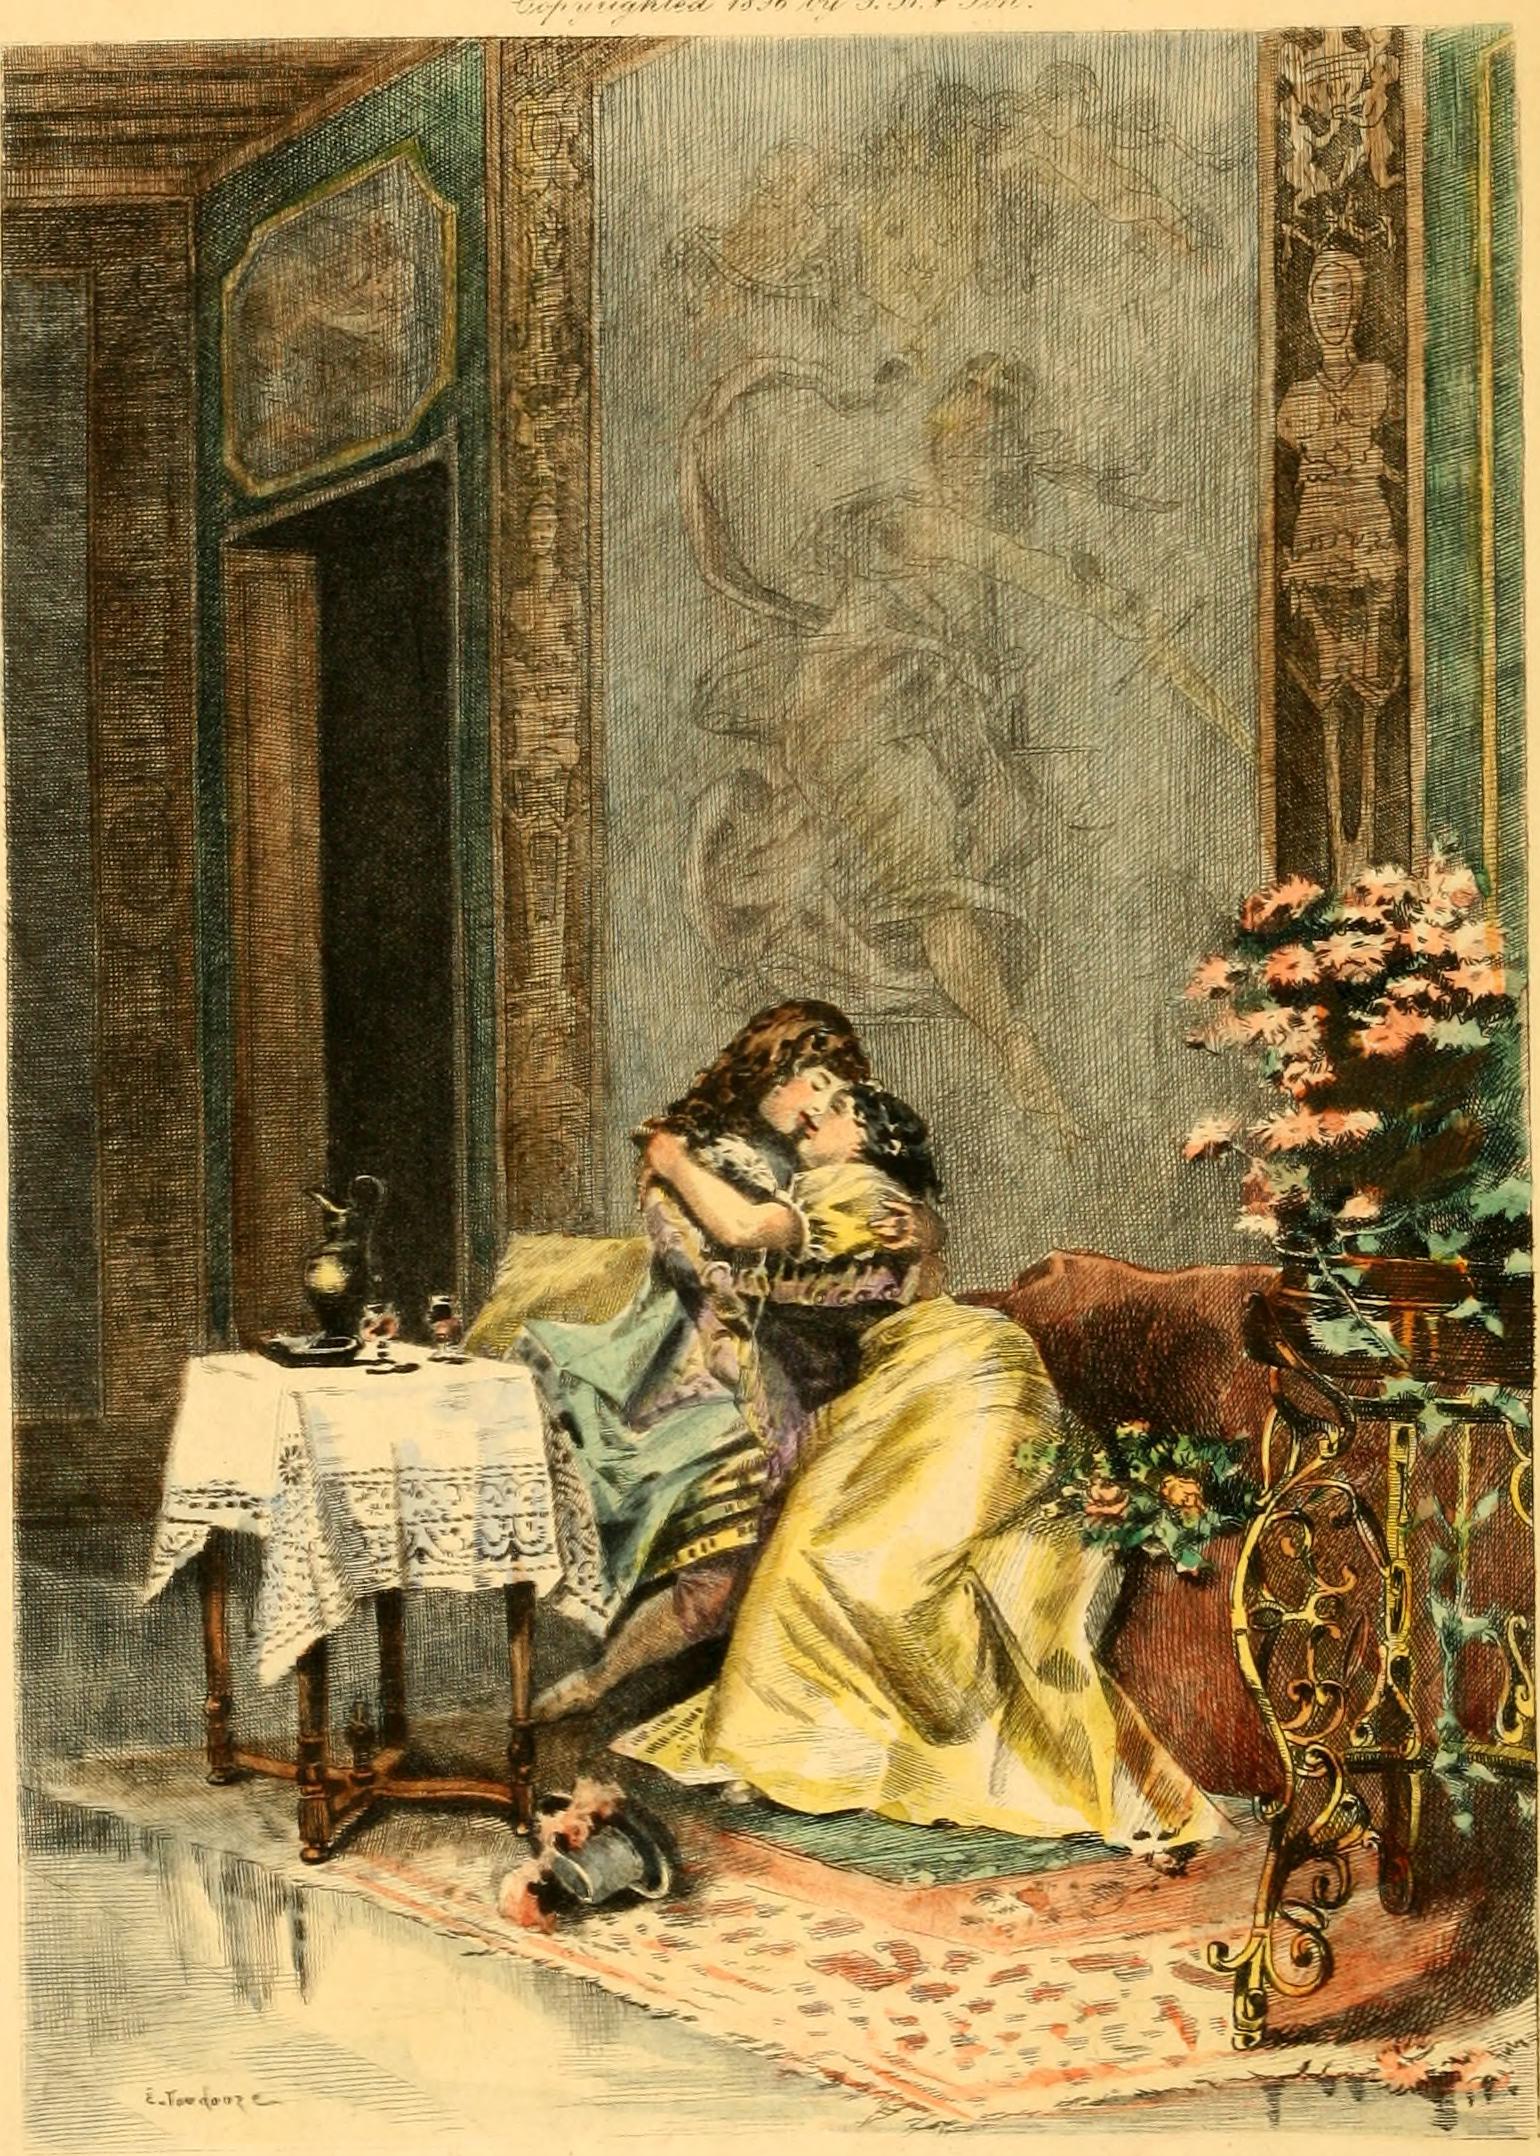 The image shows a woman sitting on a sofa in an elegant-looking room with a large, ornate rug. She is wearing a gray dress. Another woman in gold dress, is in her arms. They seem to be consoling each other.